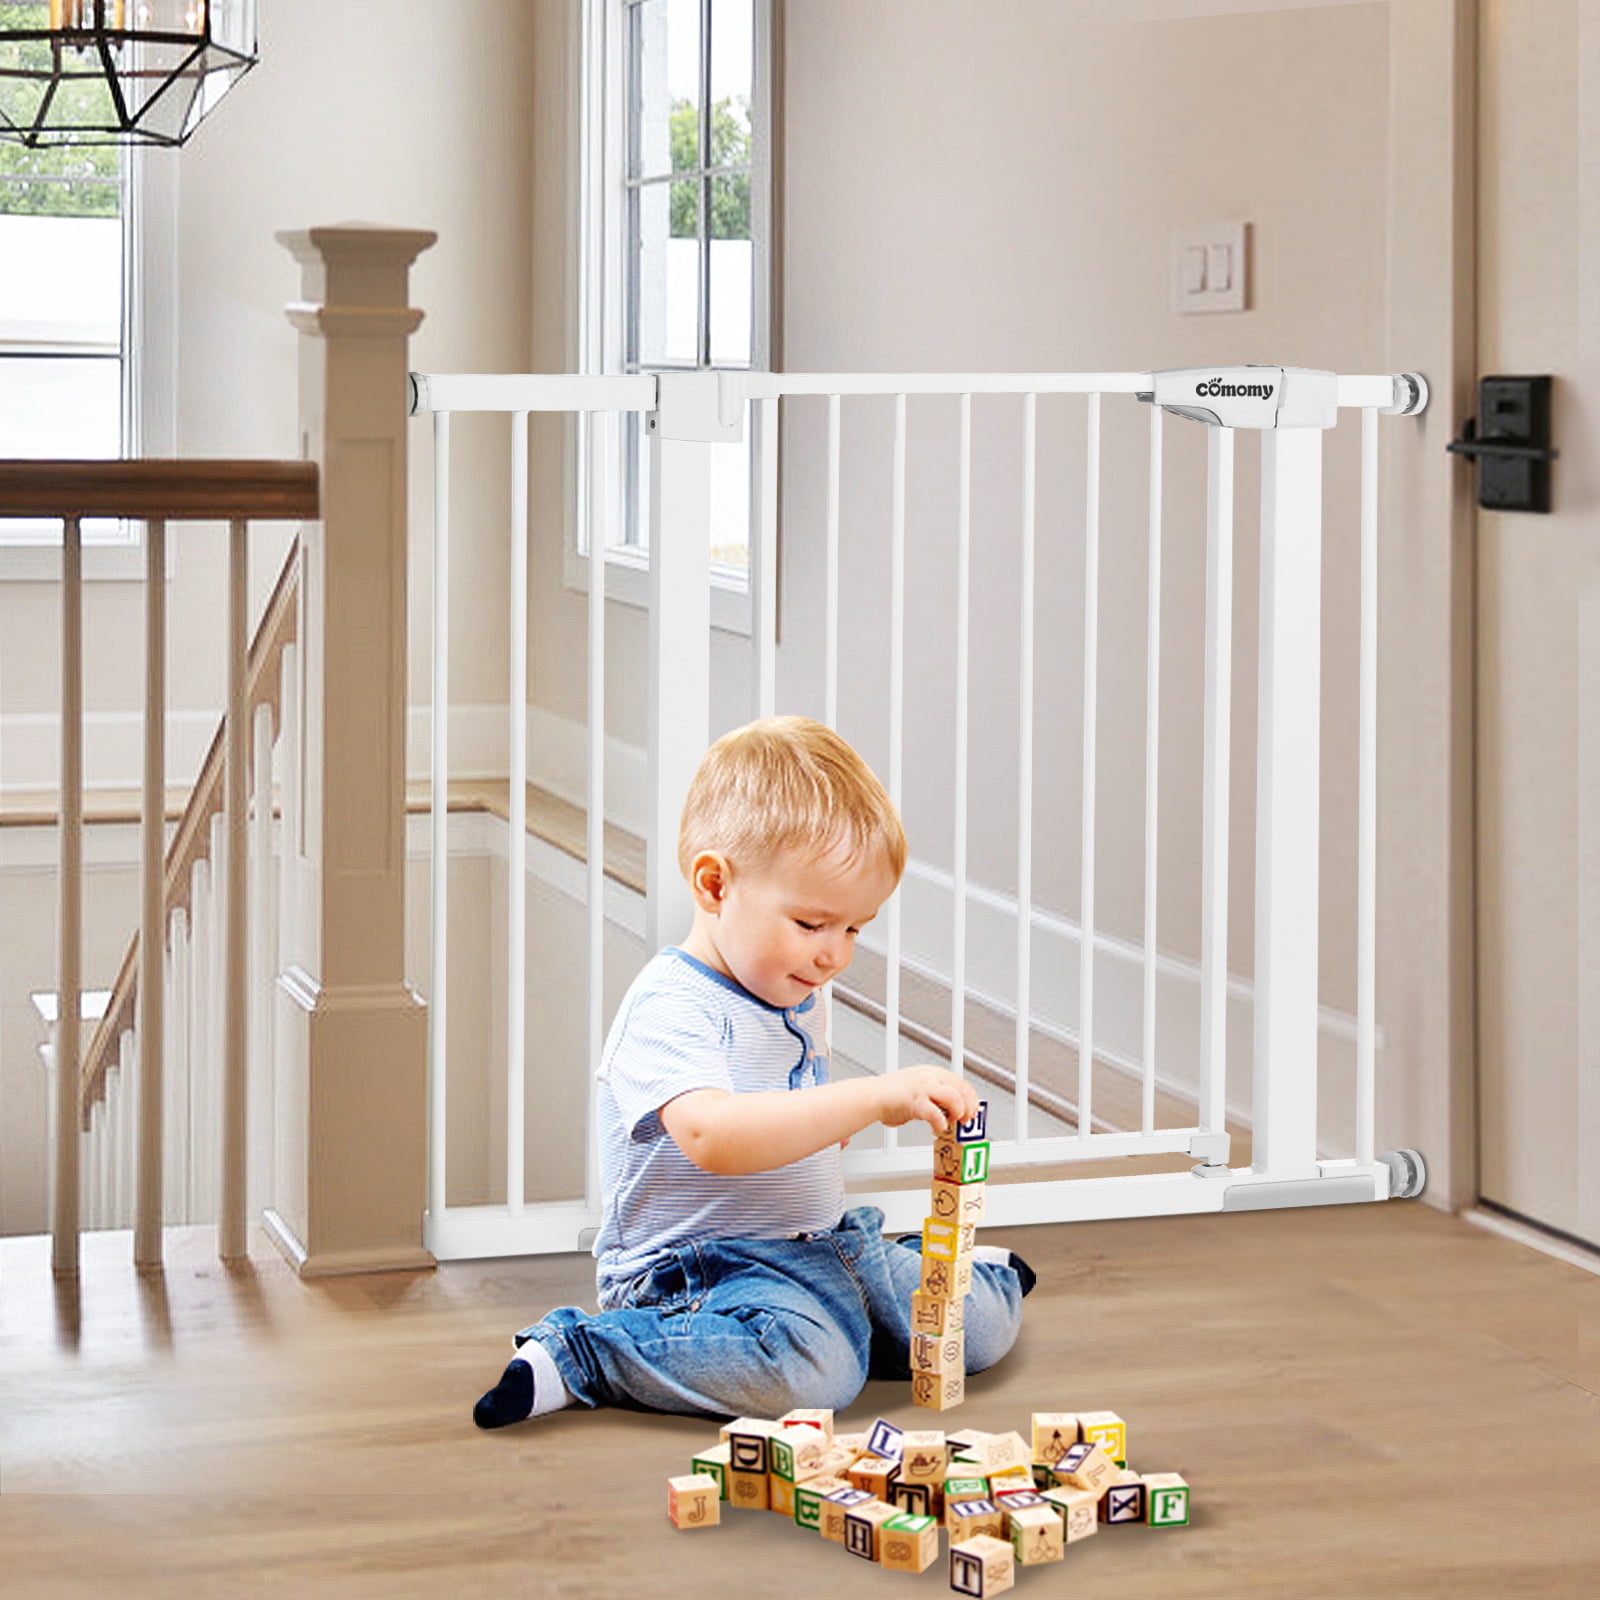 Baby Toddler Stair Gate Home Safety Extra Tall Metal Doorway Prevention Barrier 